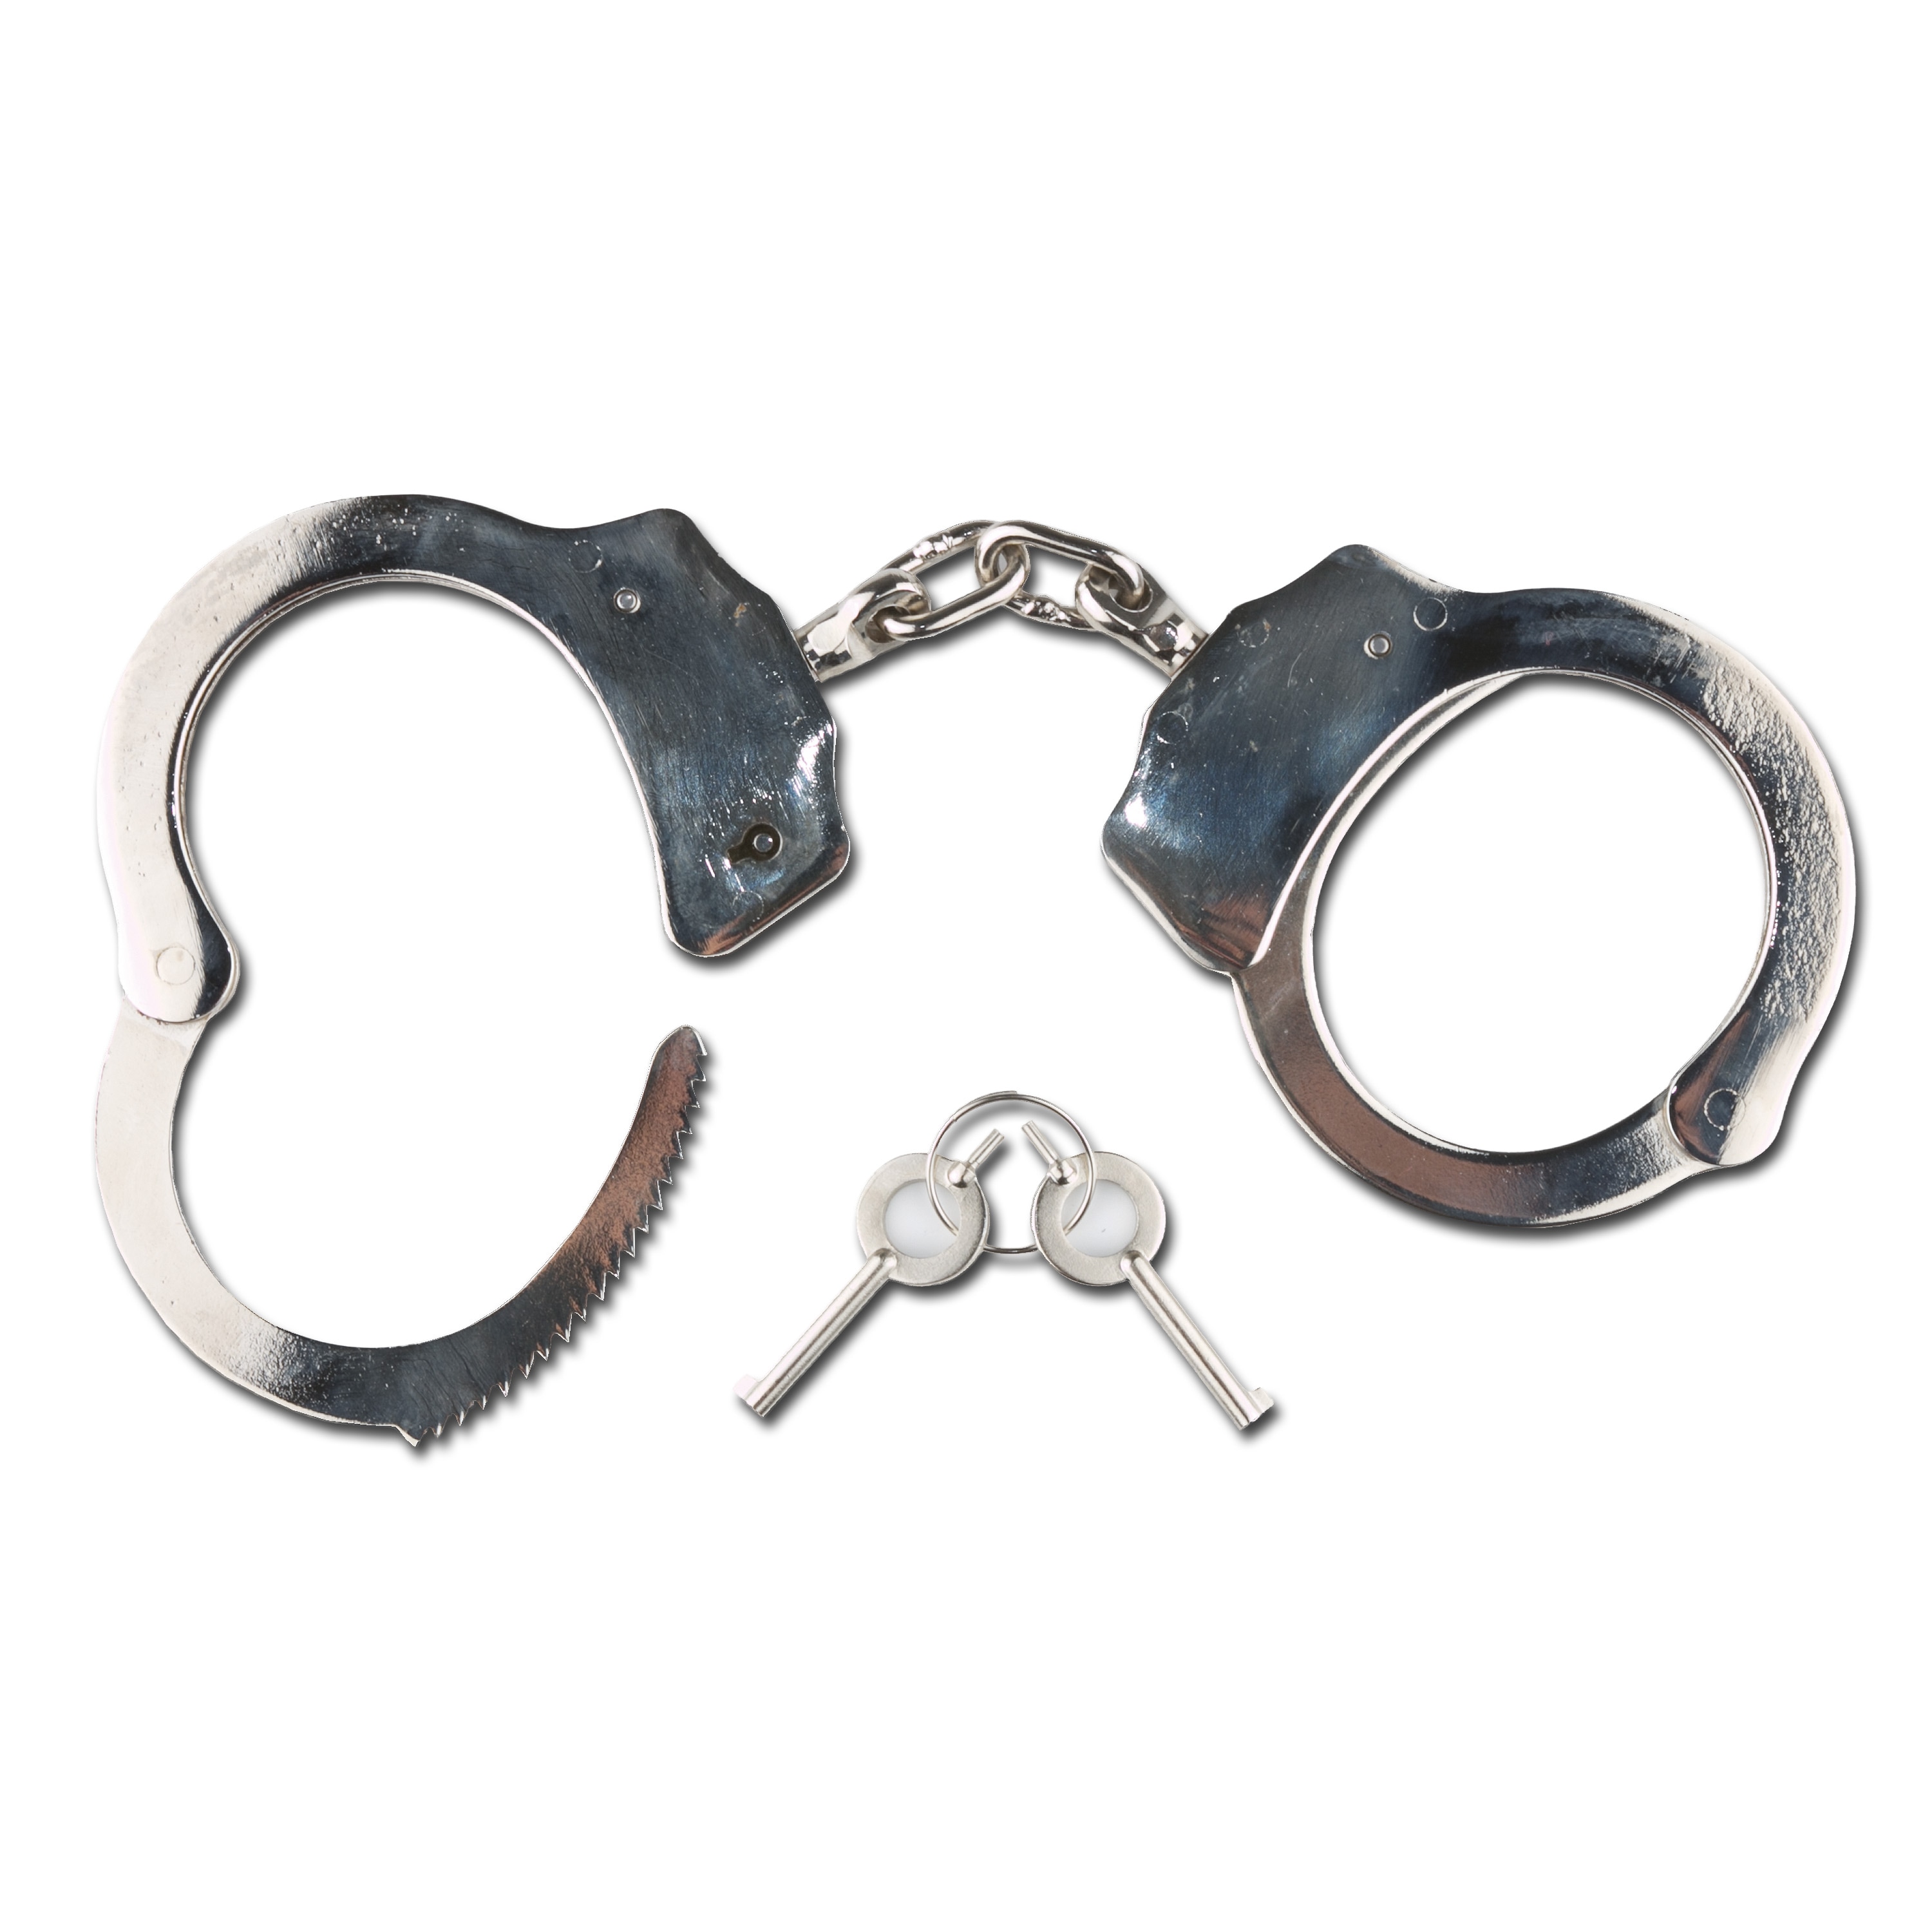 Purchase The Handcuffs Police By Asmc